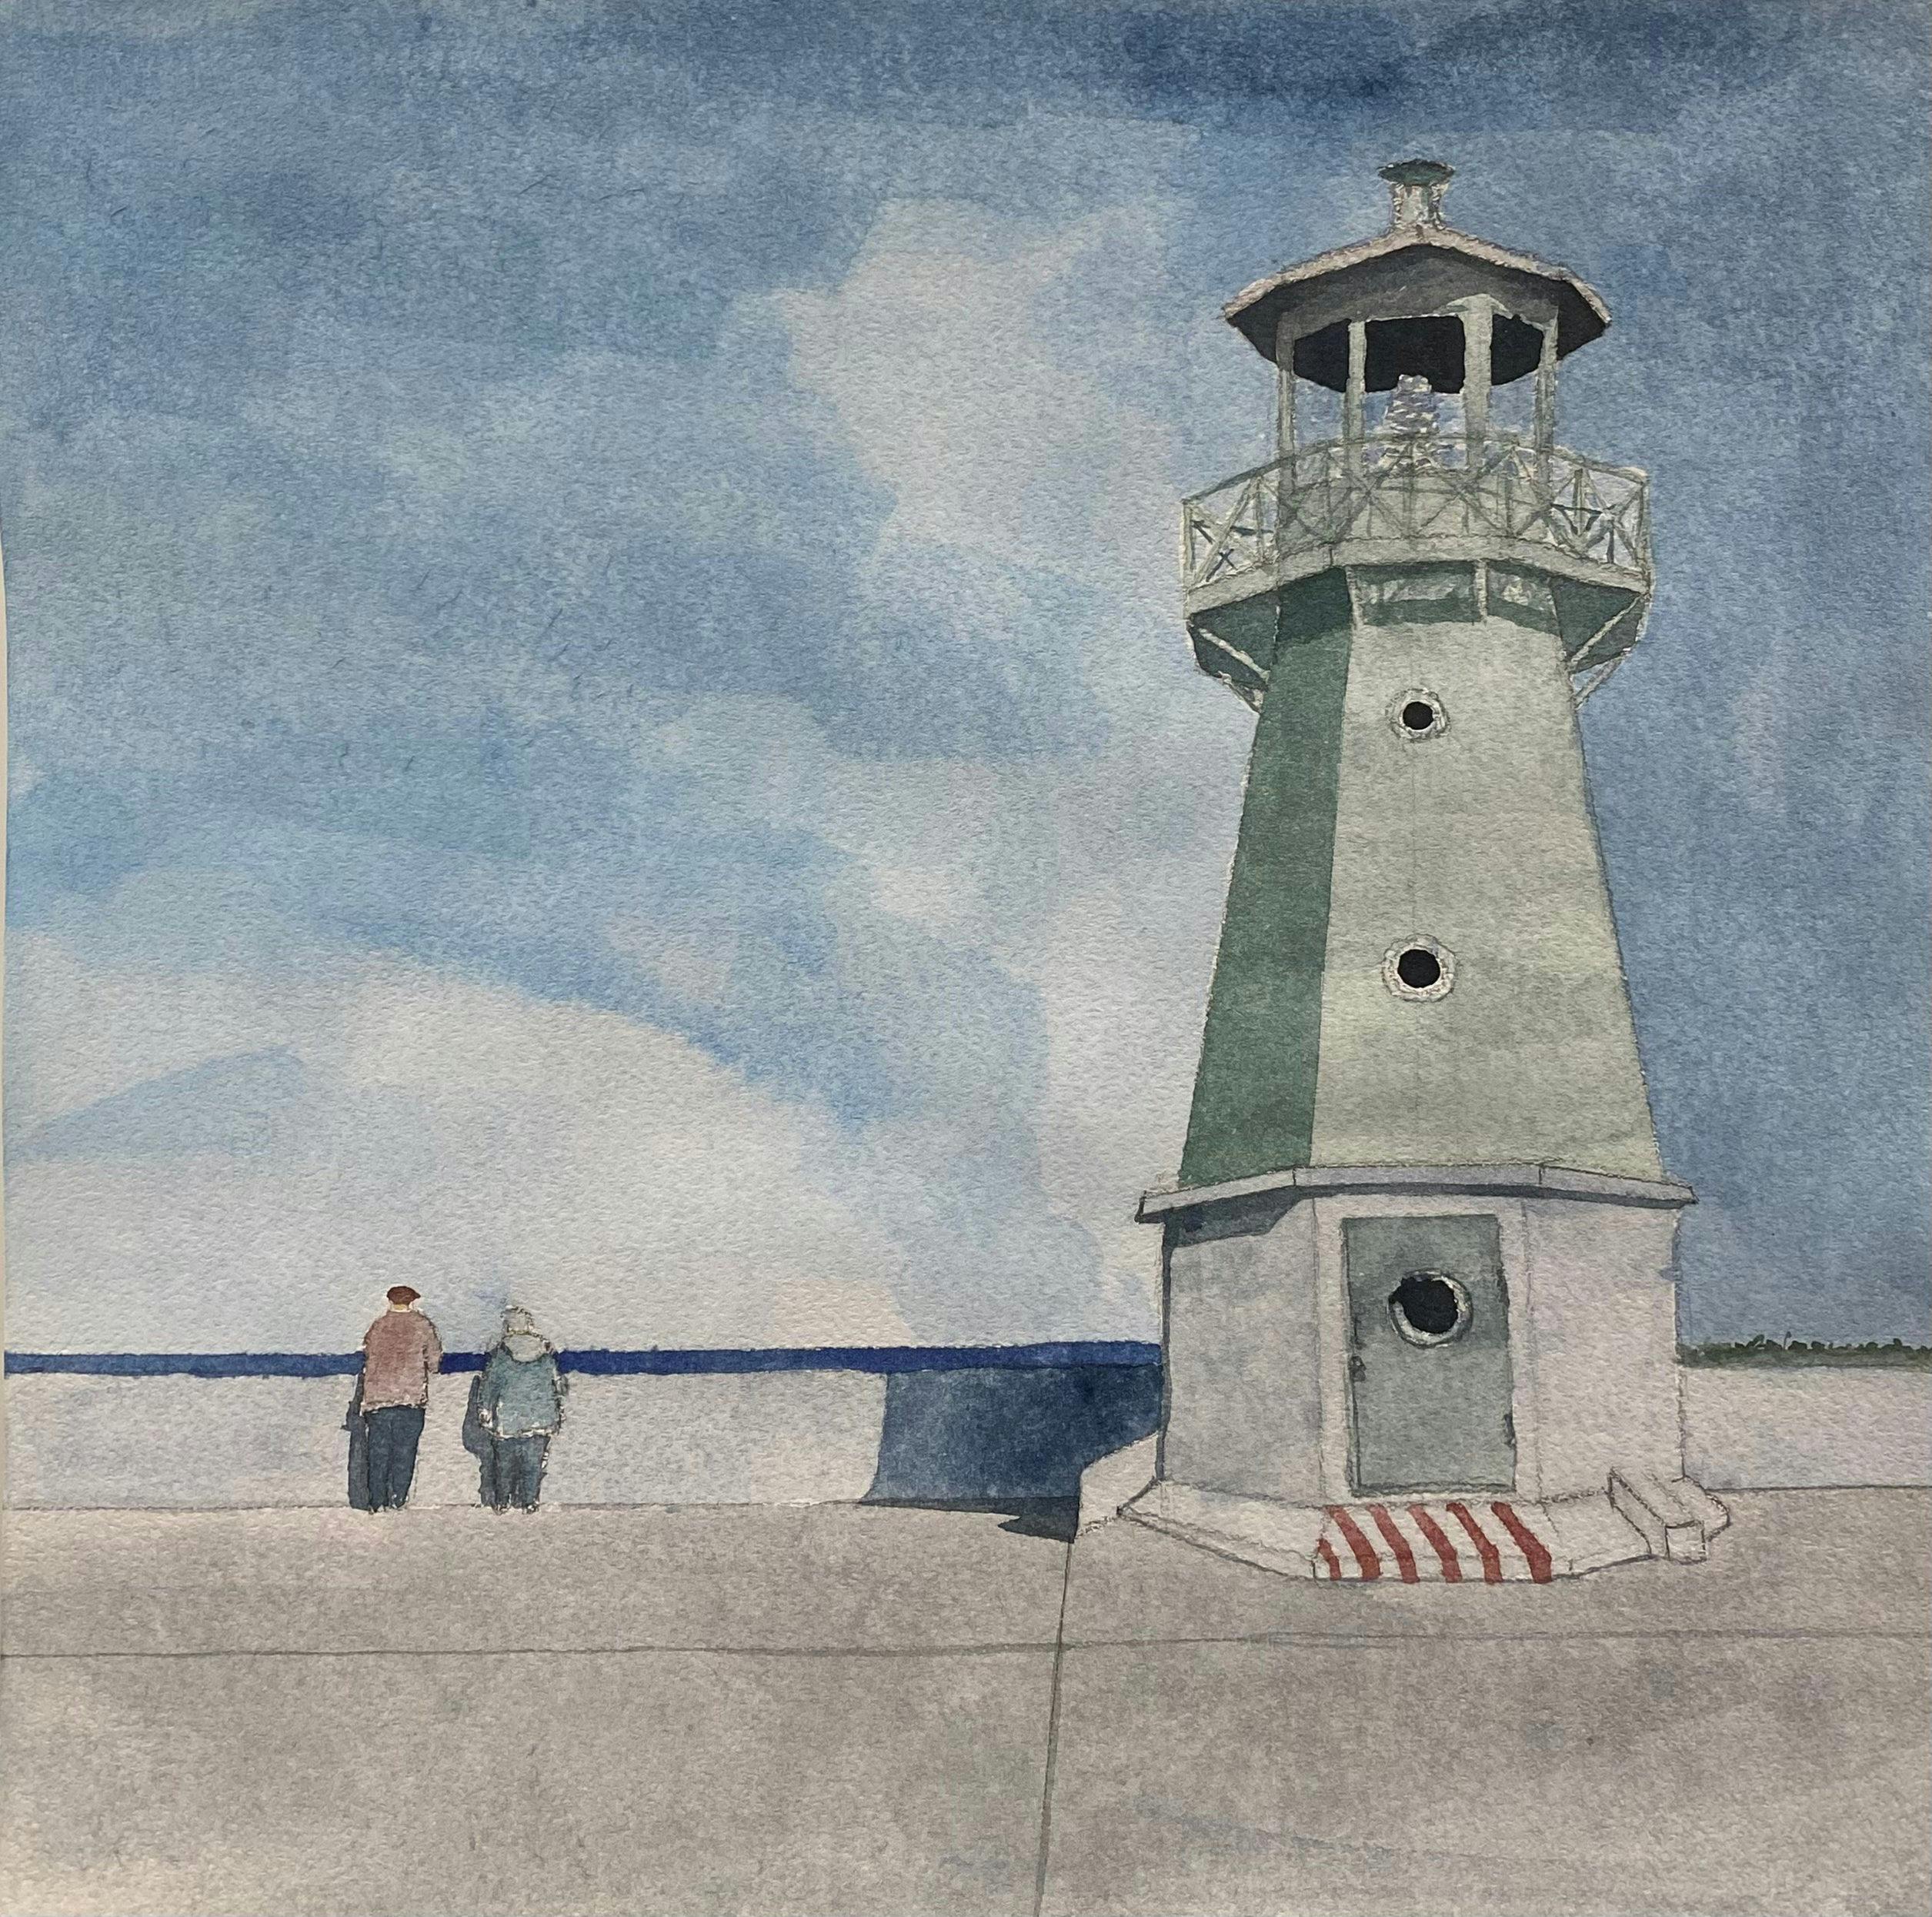 Seaside Stories: Elderly Love by the Baltic Lighthouse